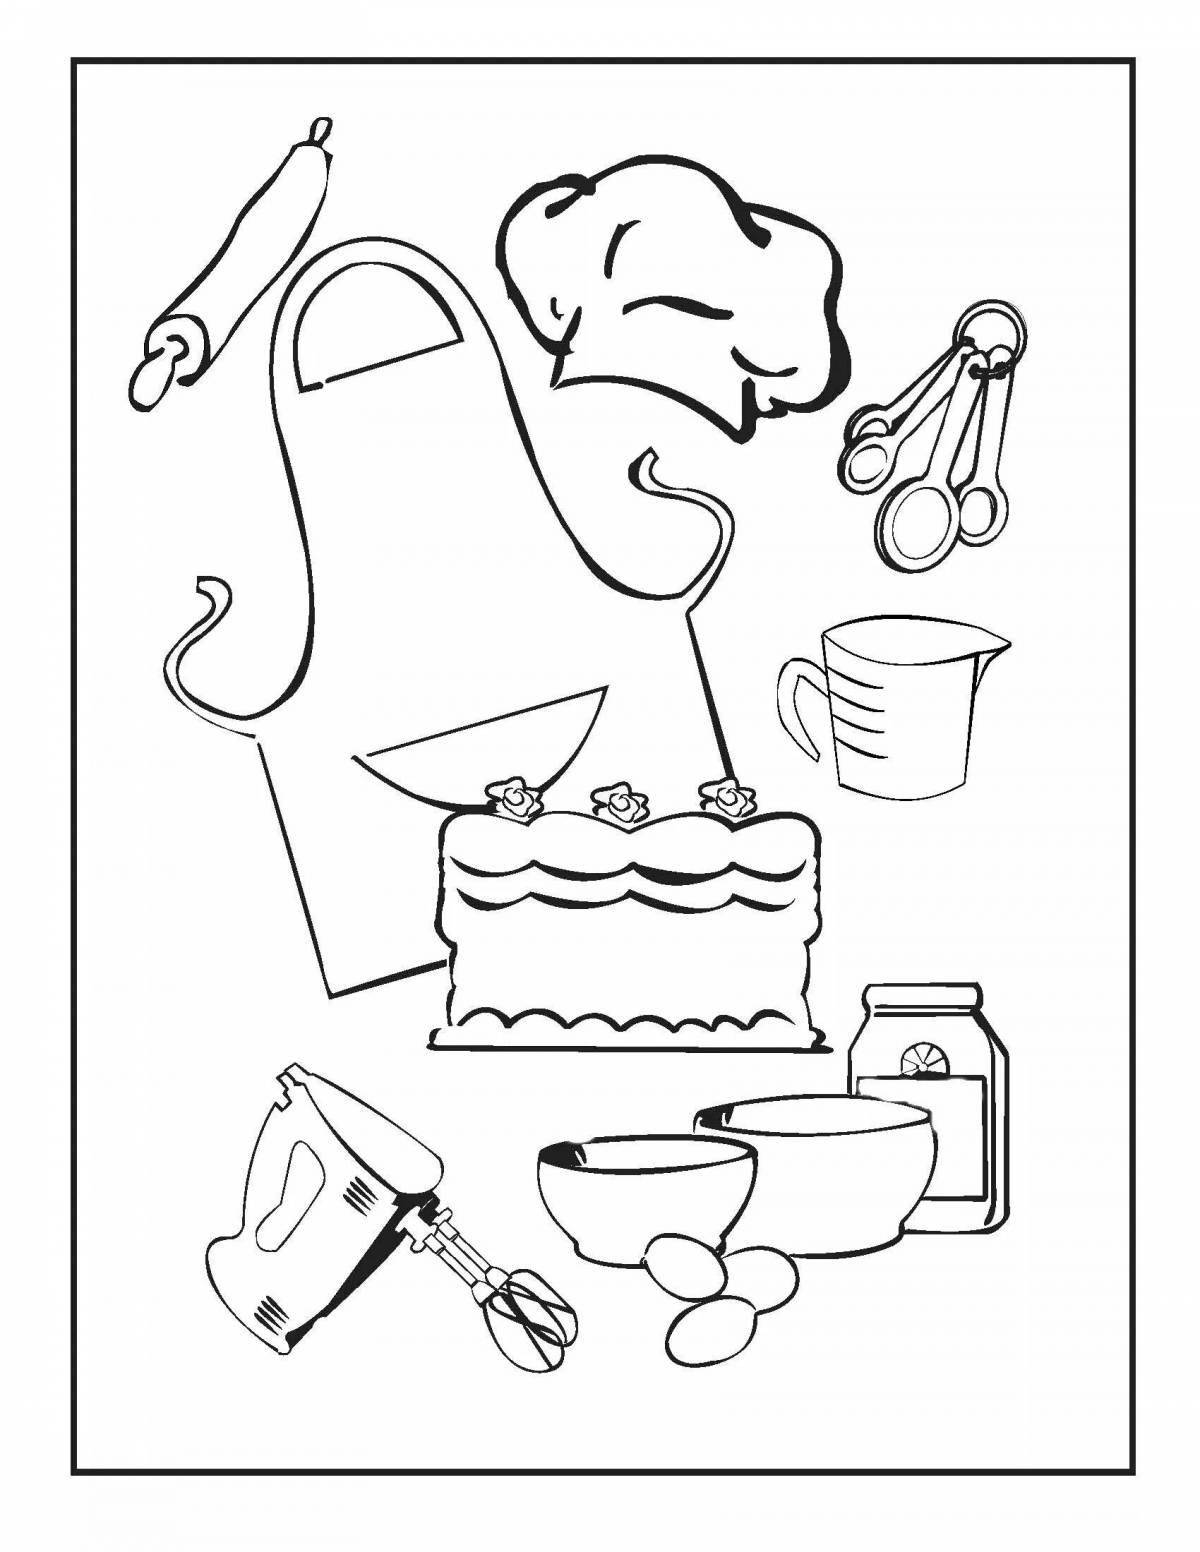 Adorable kitchen tools coloring page